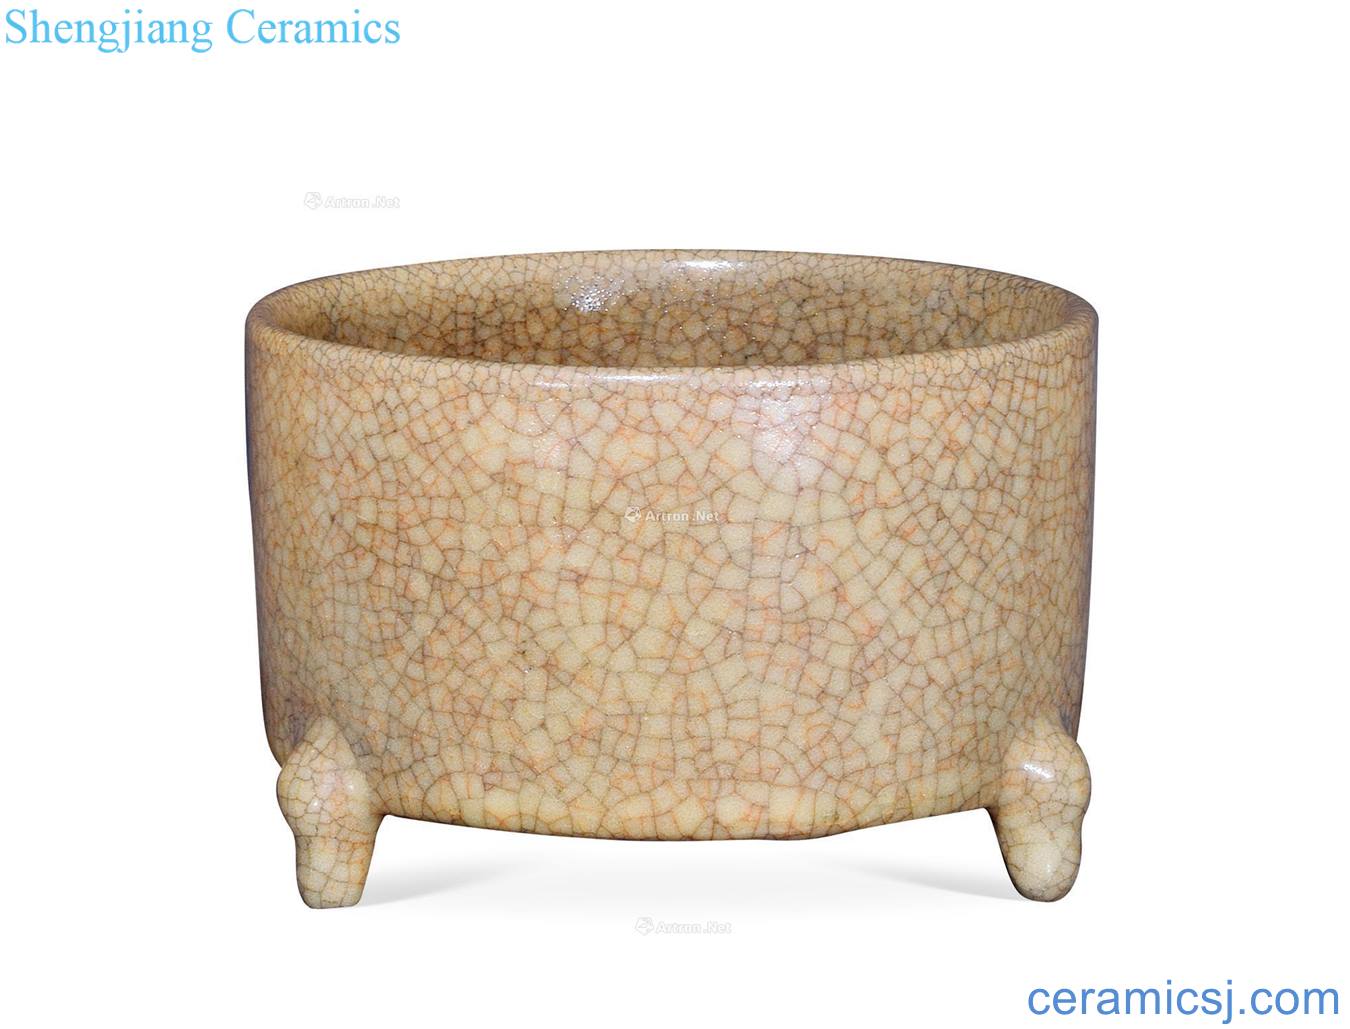 Song brother cream-colored glaze kiln furnace with three legs